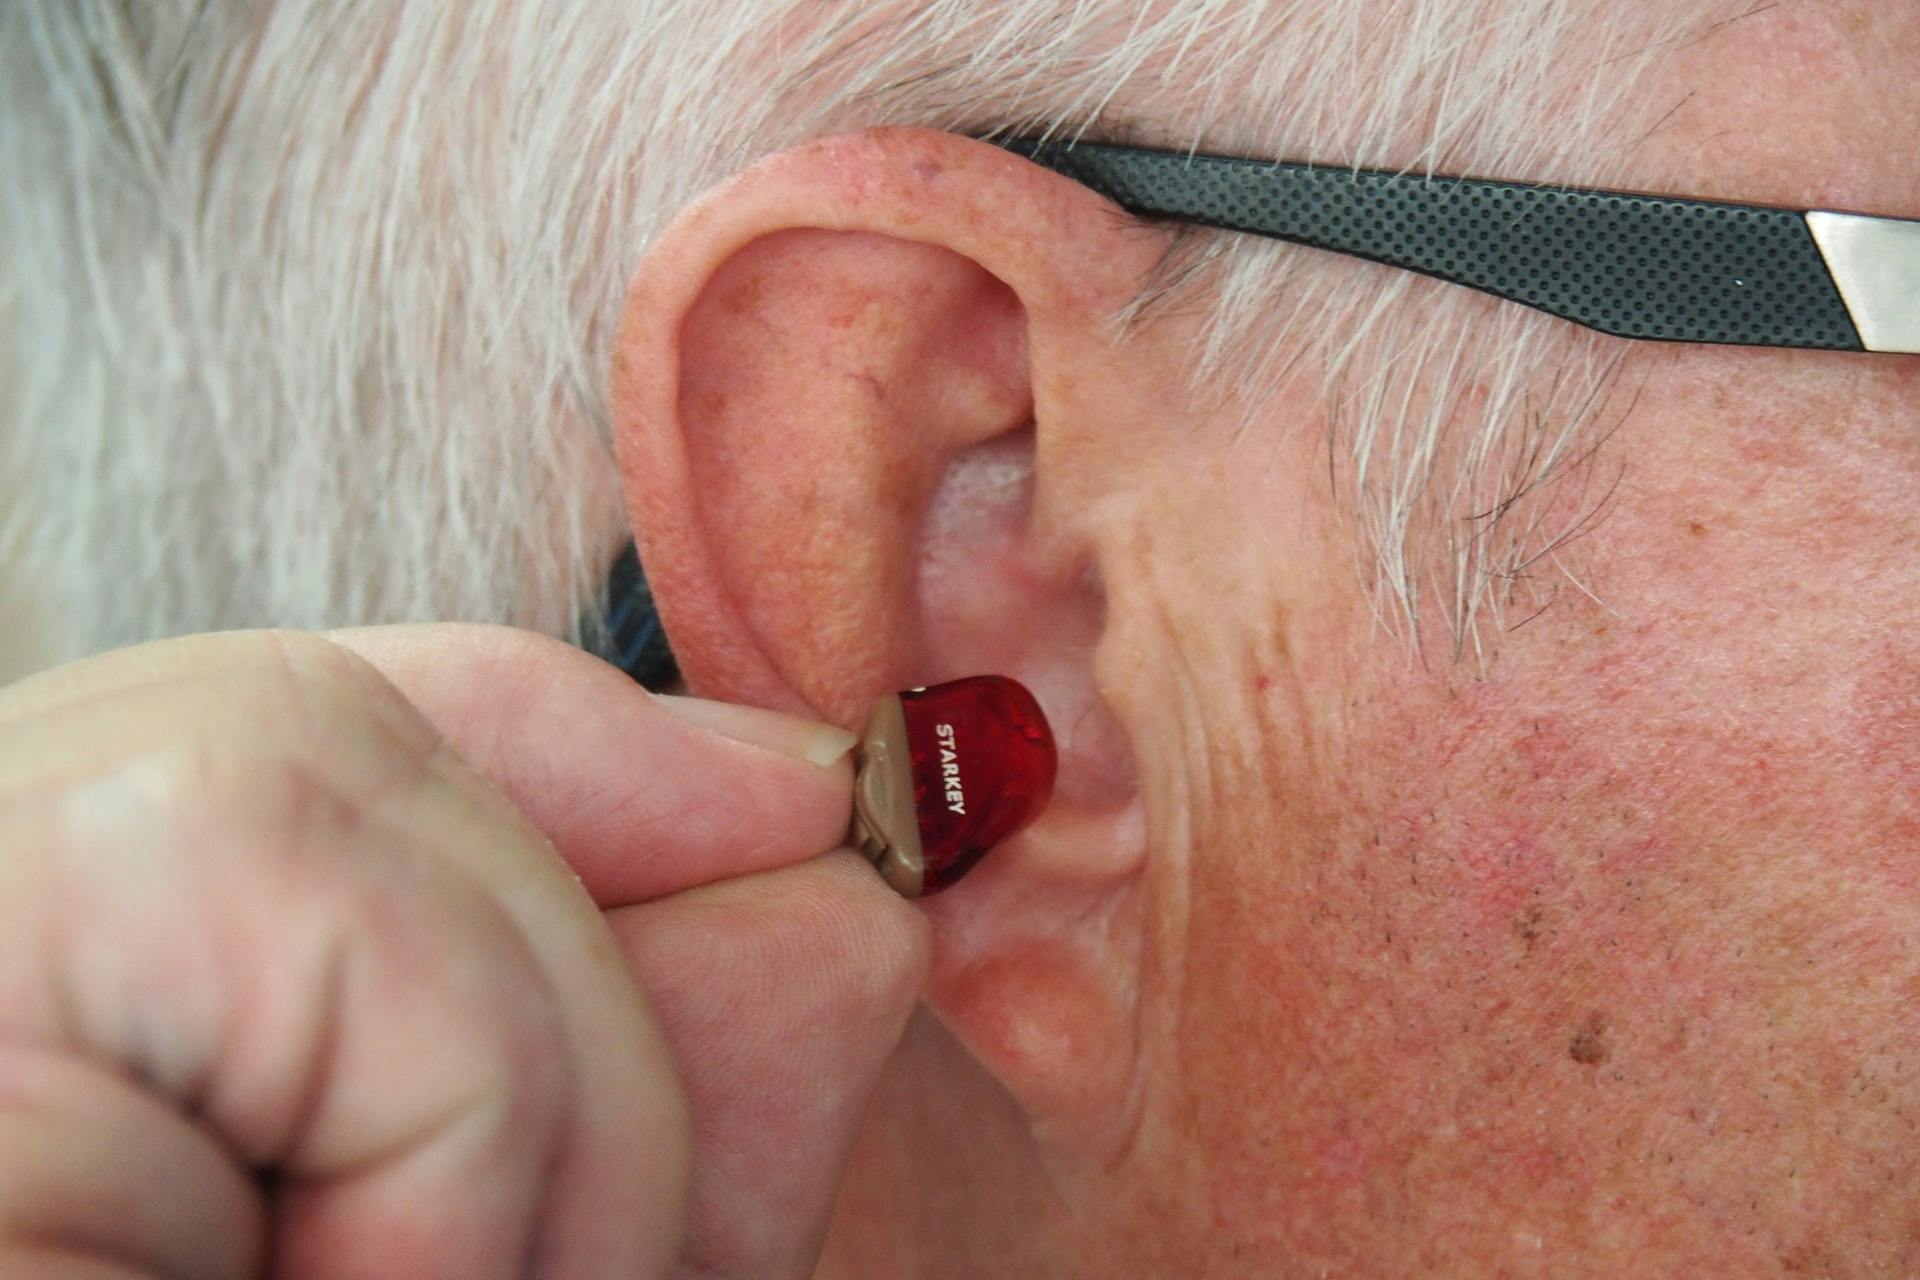 What Does Medicare Not Cover - hearing aid close up of ear.jpg